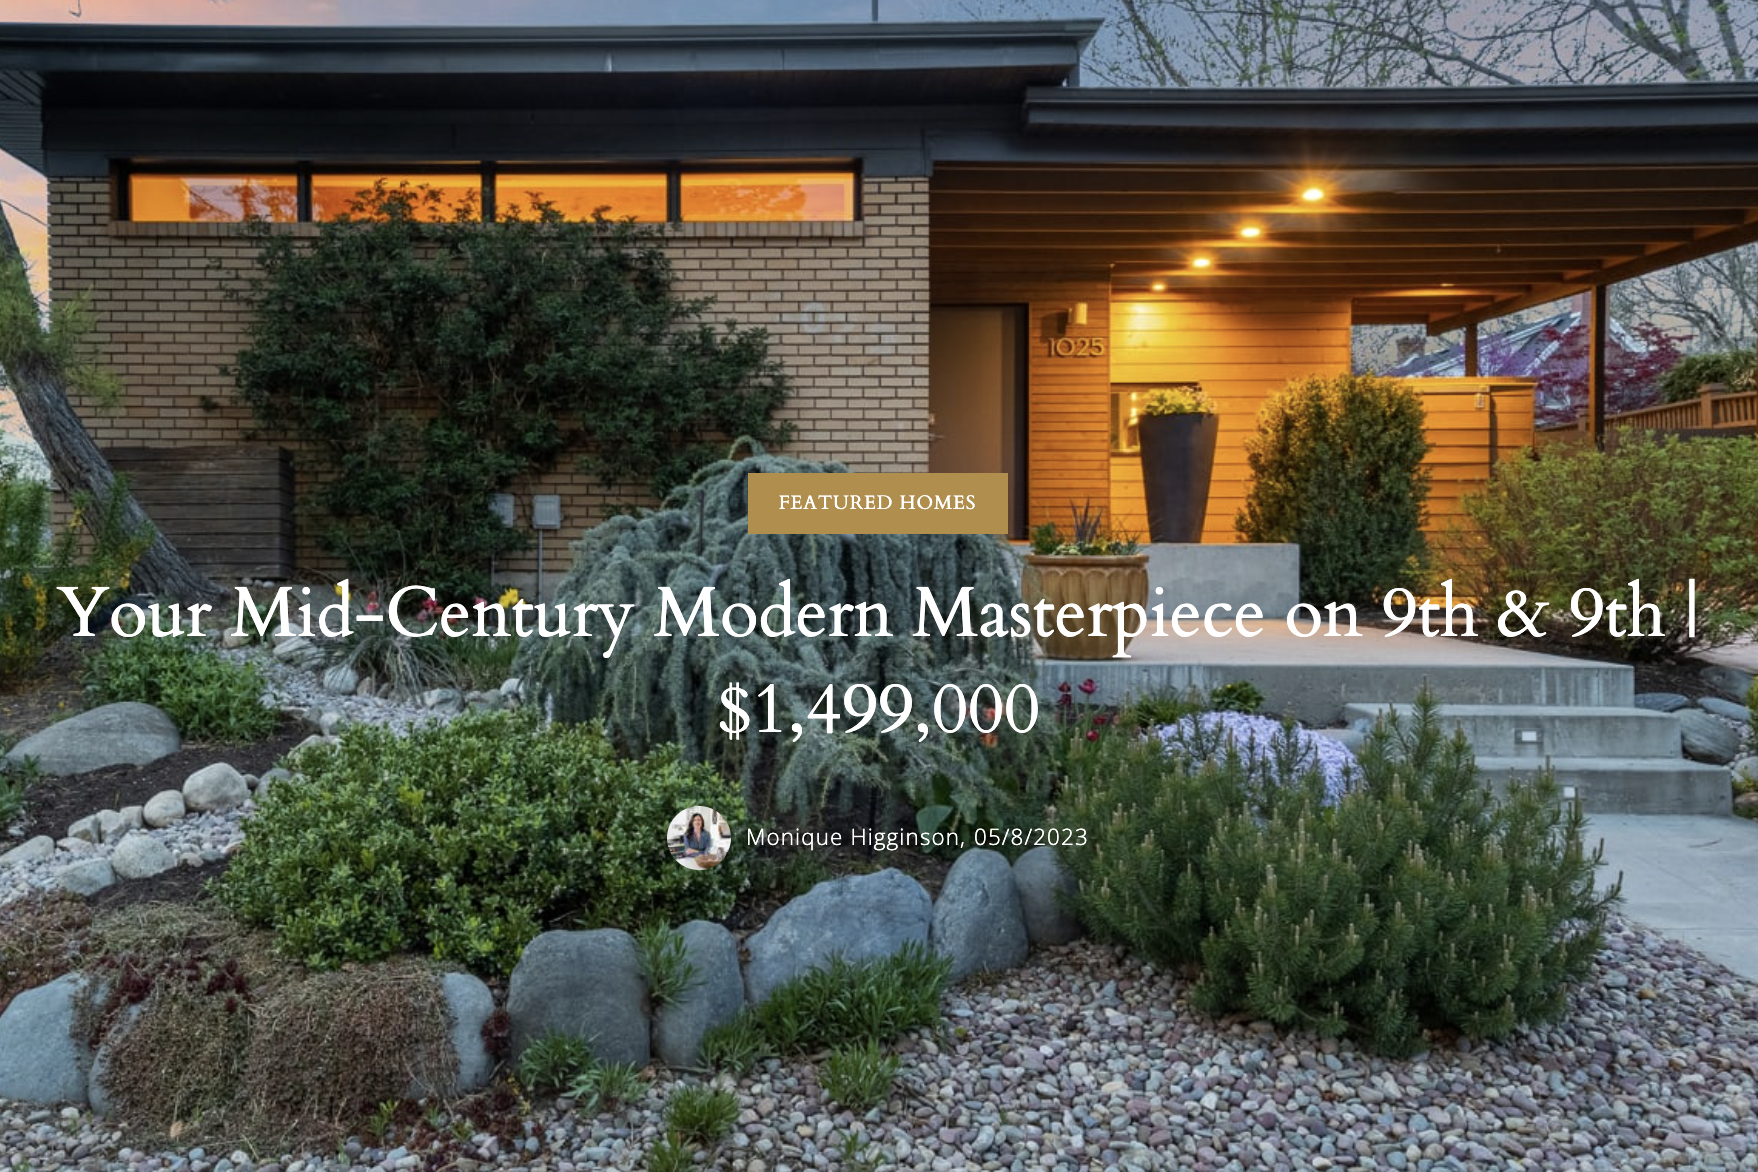 a modern home blog with te title "you're mid-century modern masterpiece on 9th & 9th"